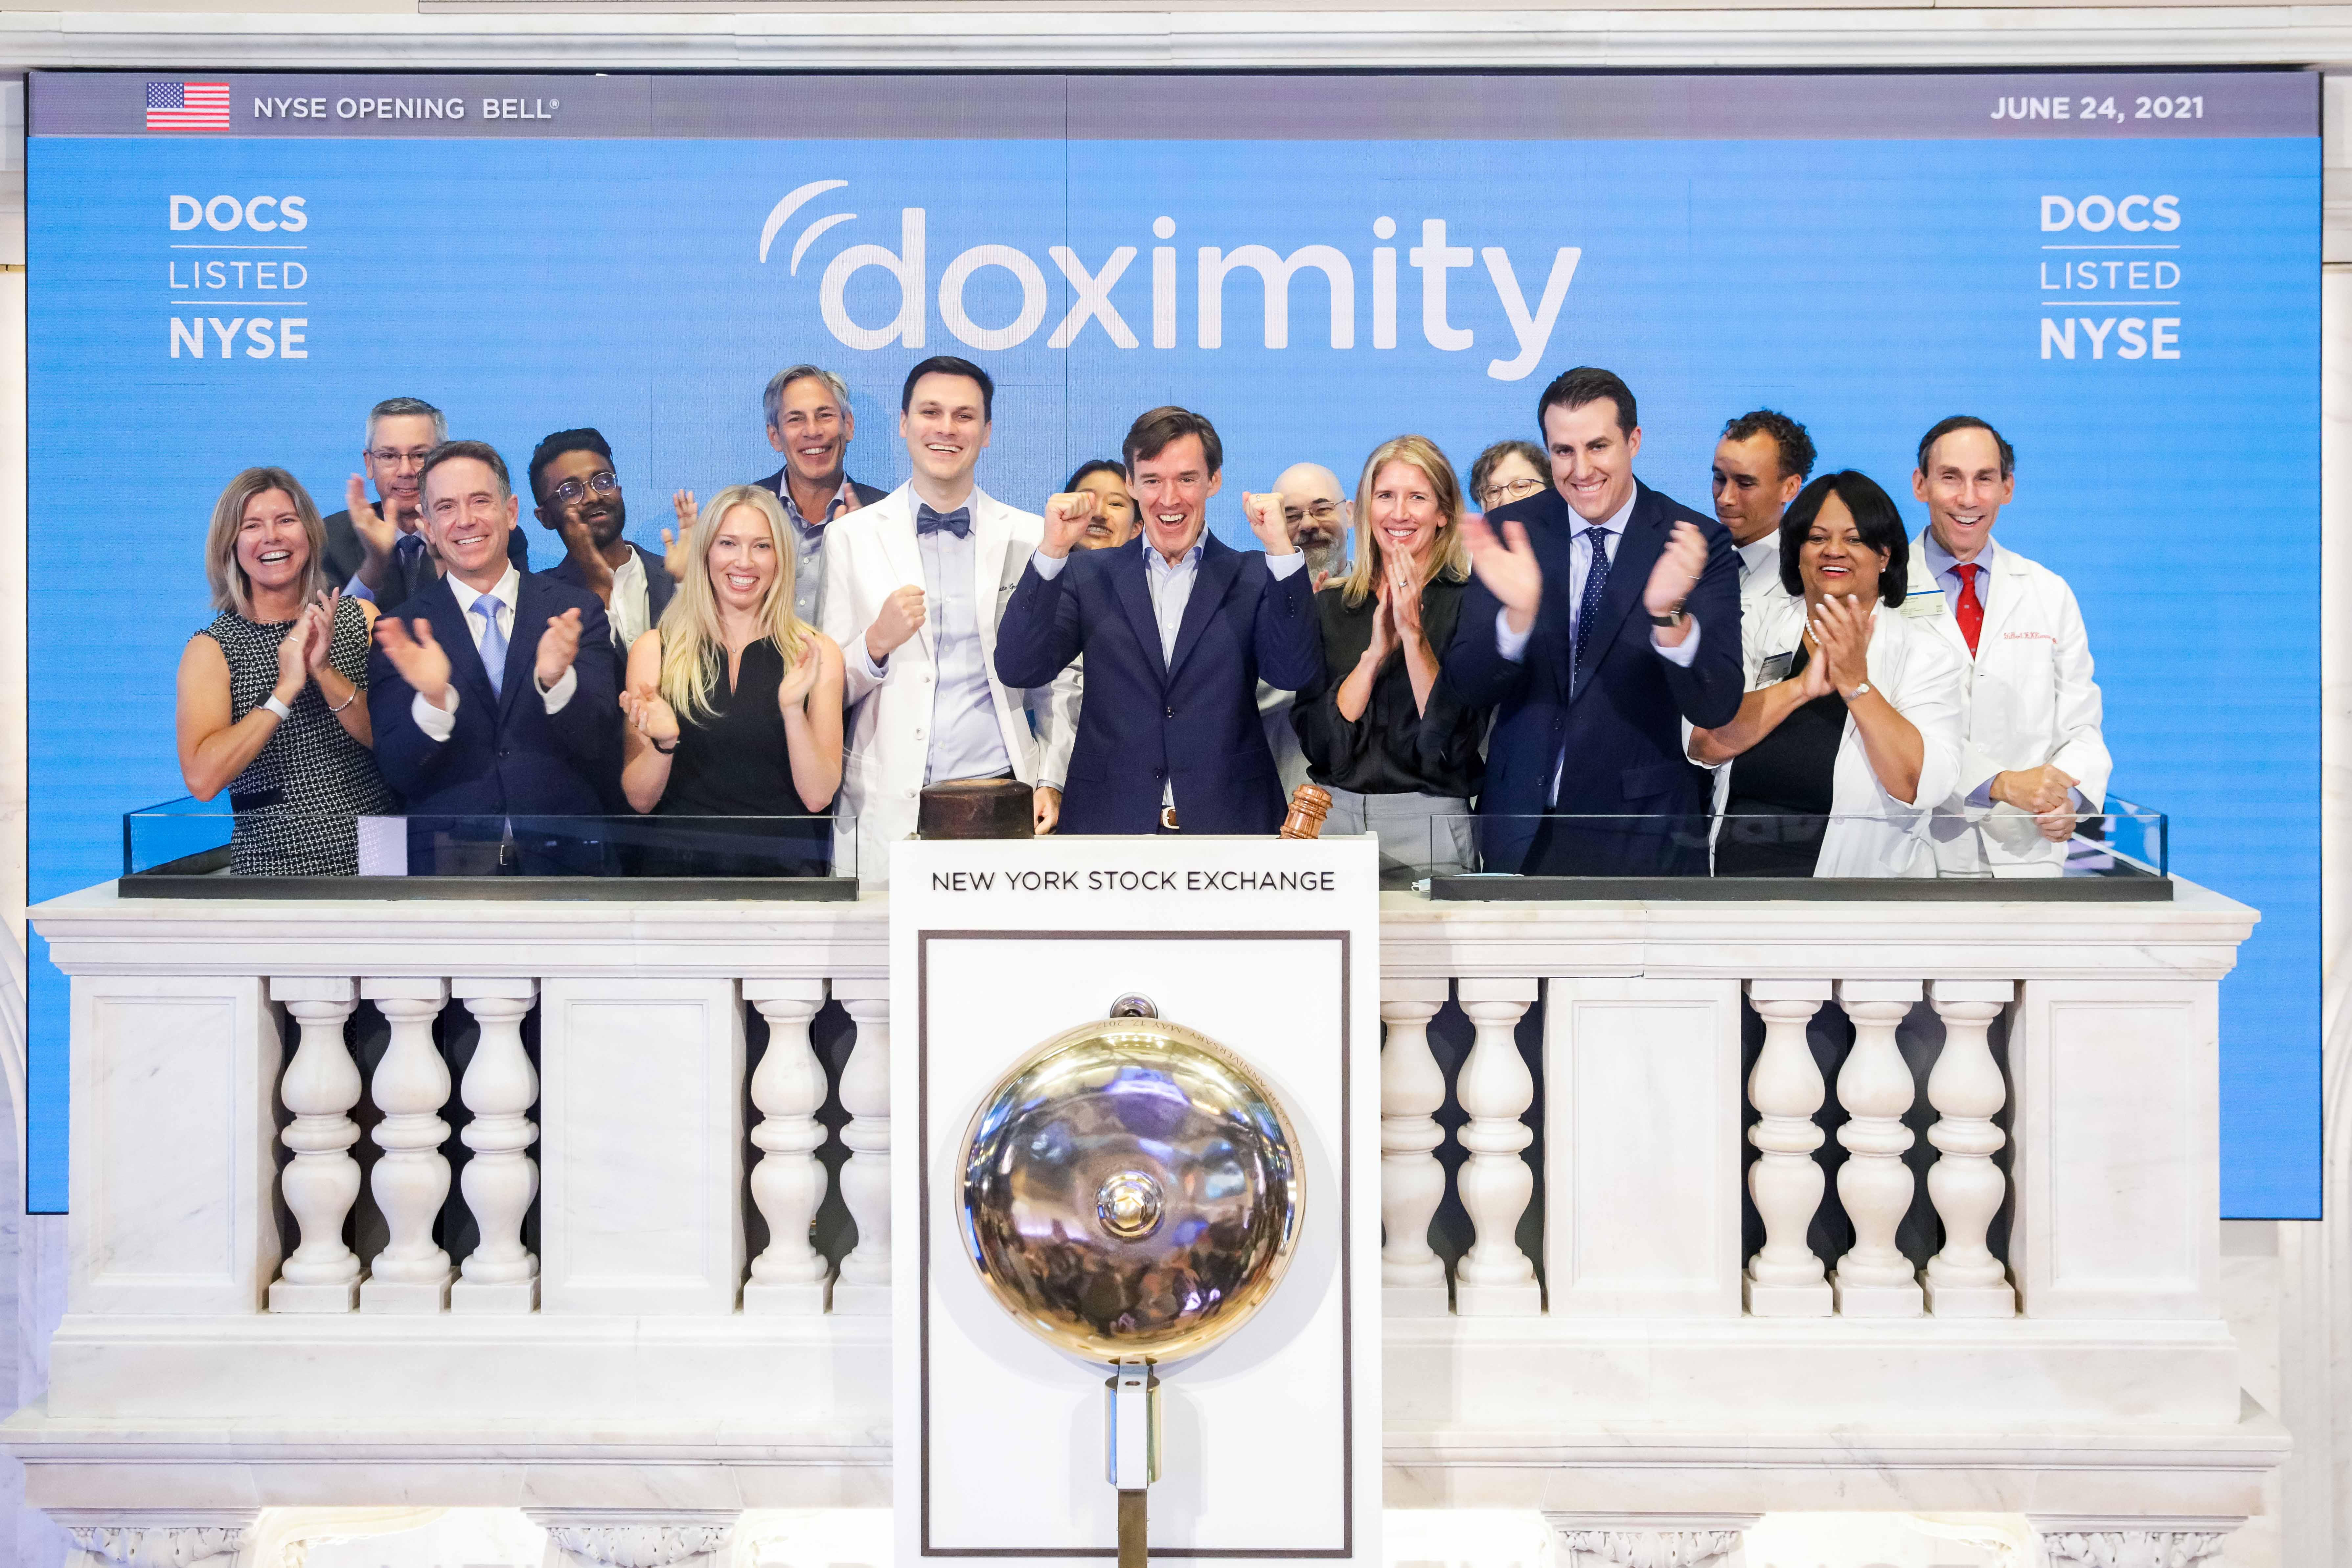 Doximity executives ring the opening bell at NYSE